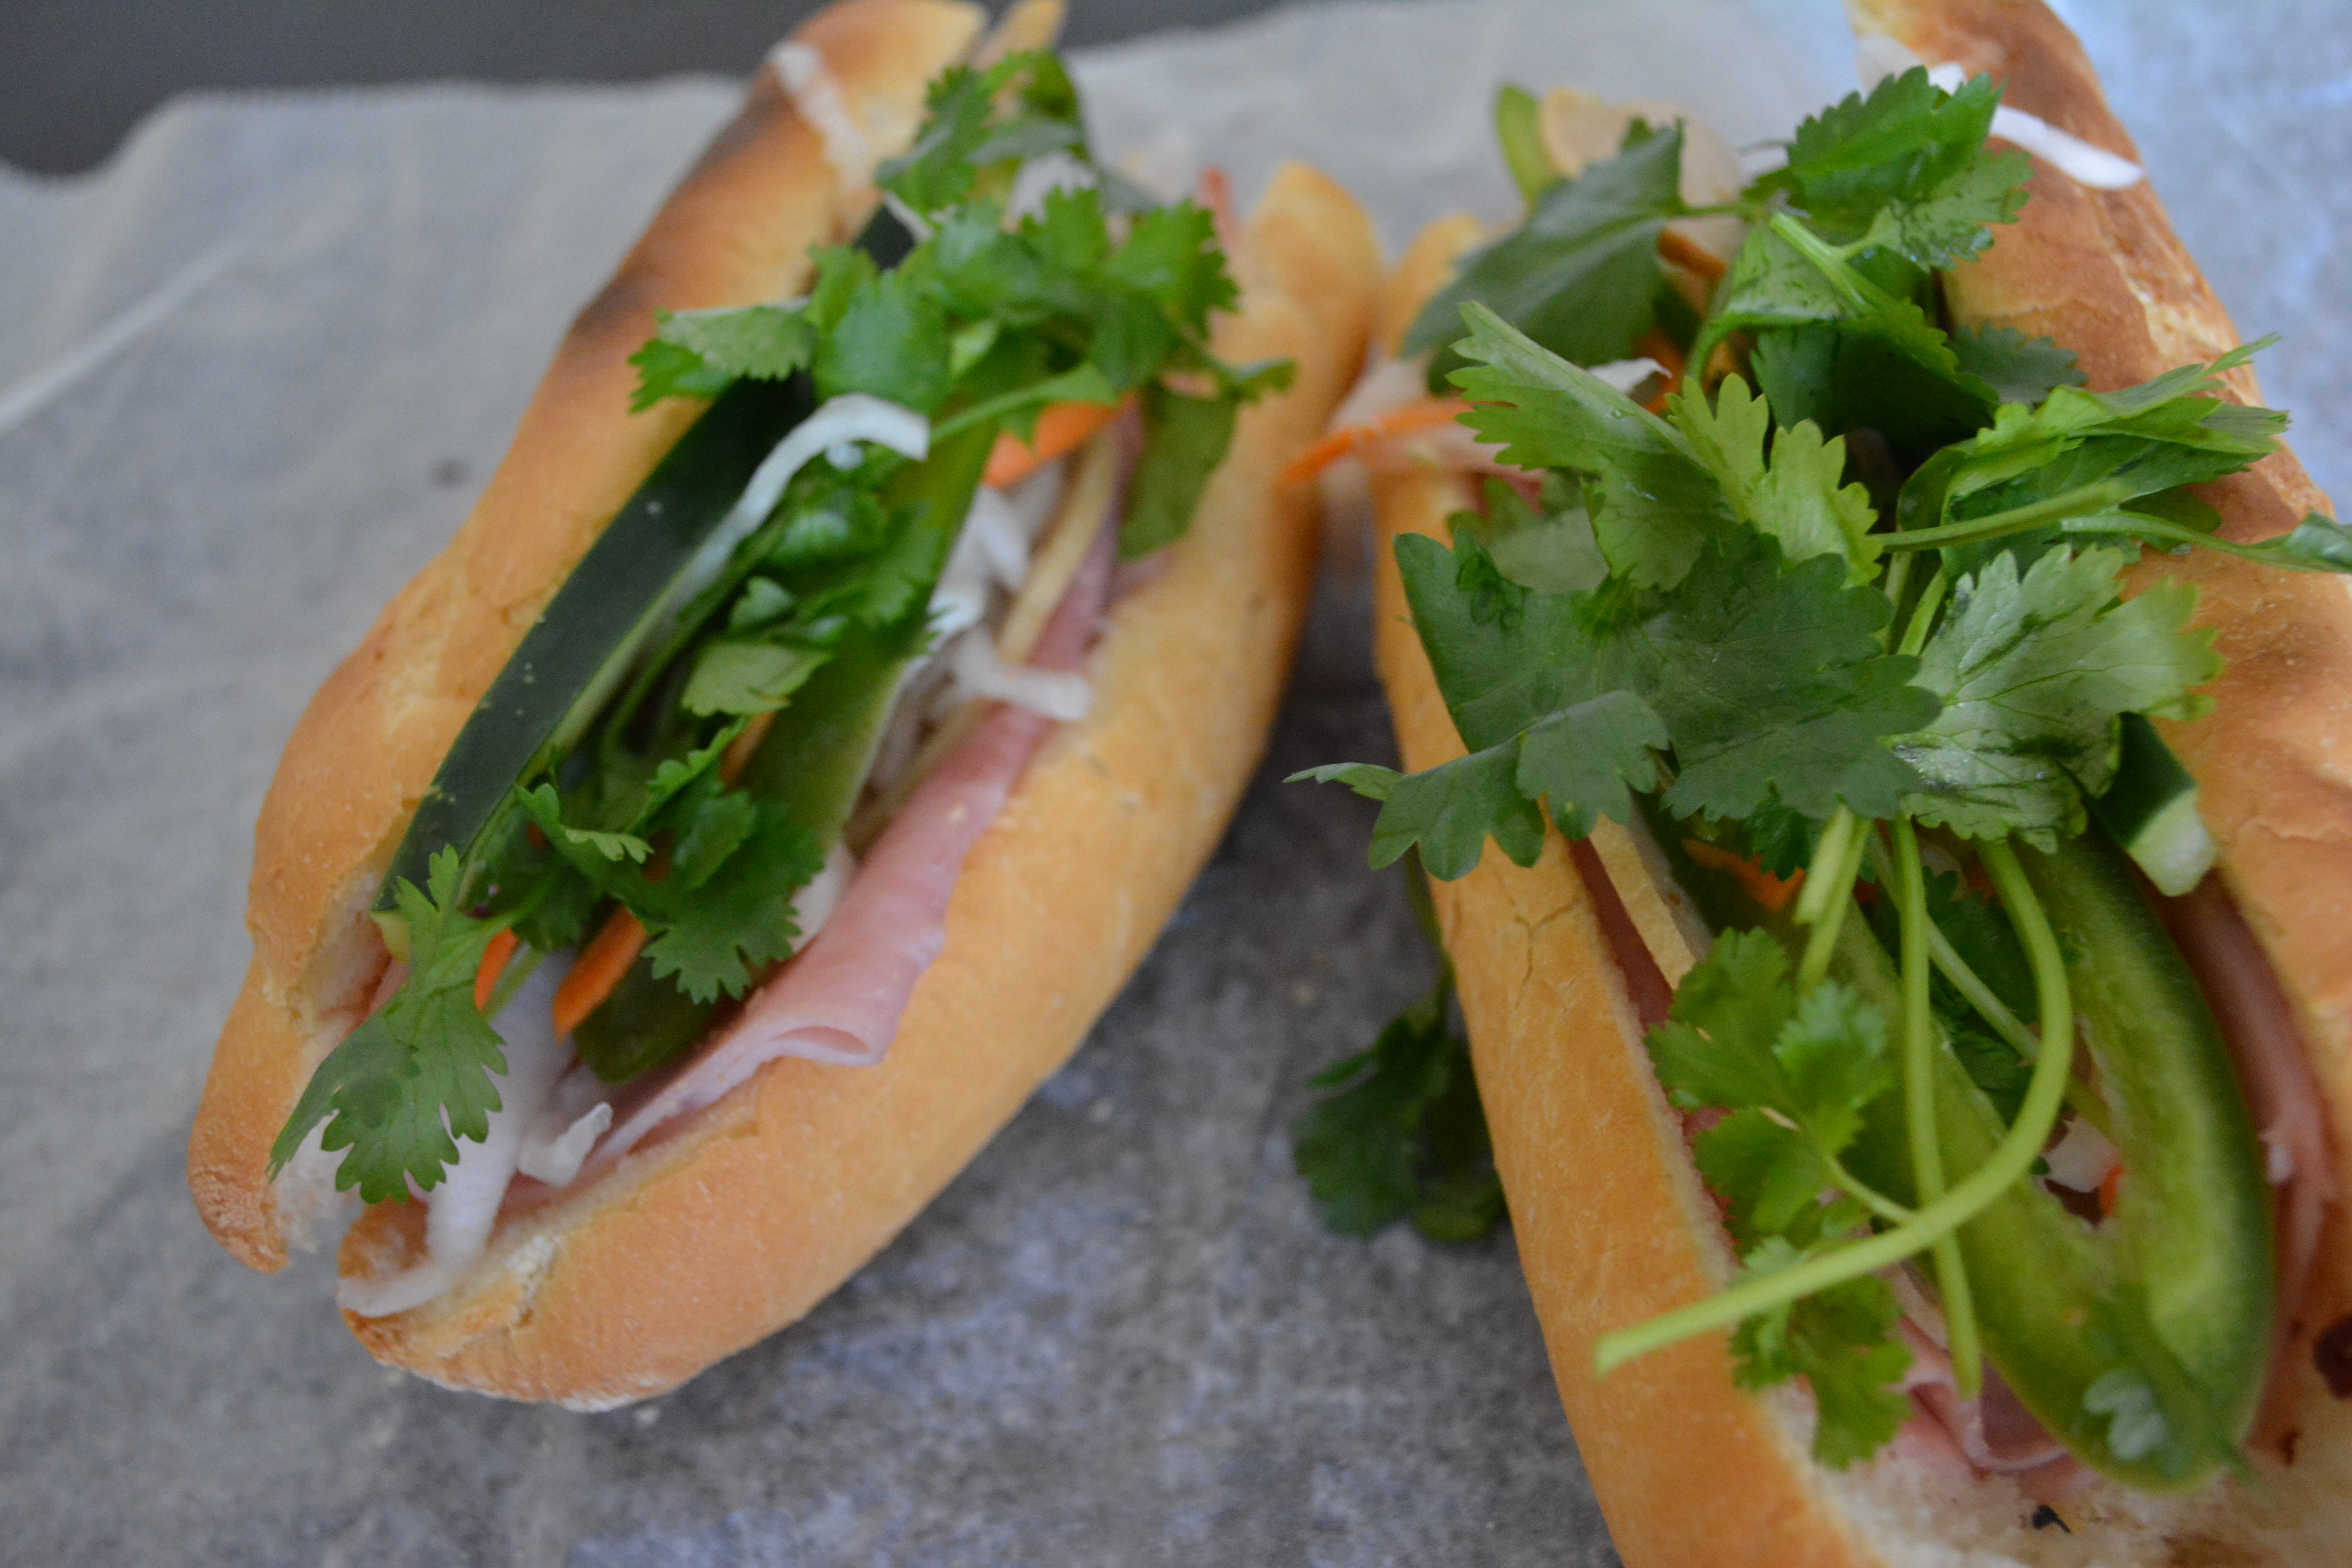 Pate and ham banh mi from Seven Corners' Banh Mi So 1. (Photo: Lanna Nguyen/DC on Heels)